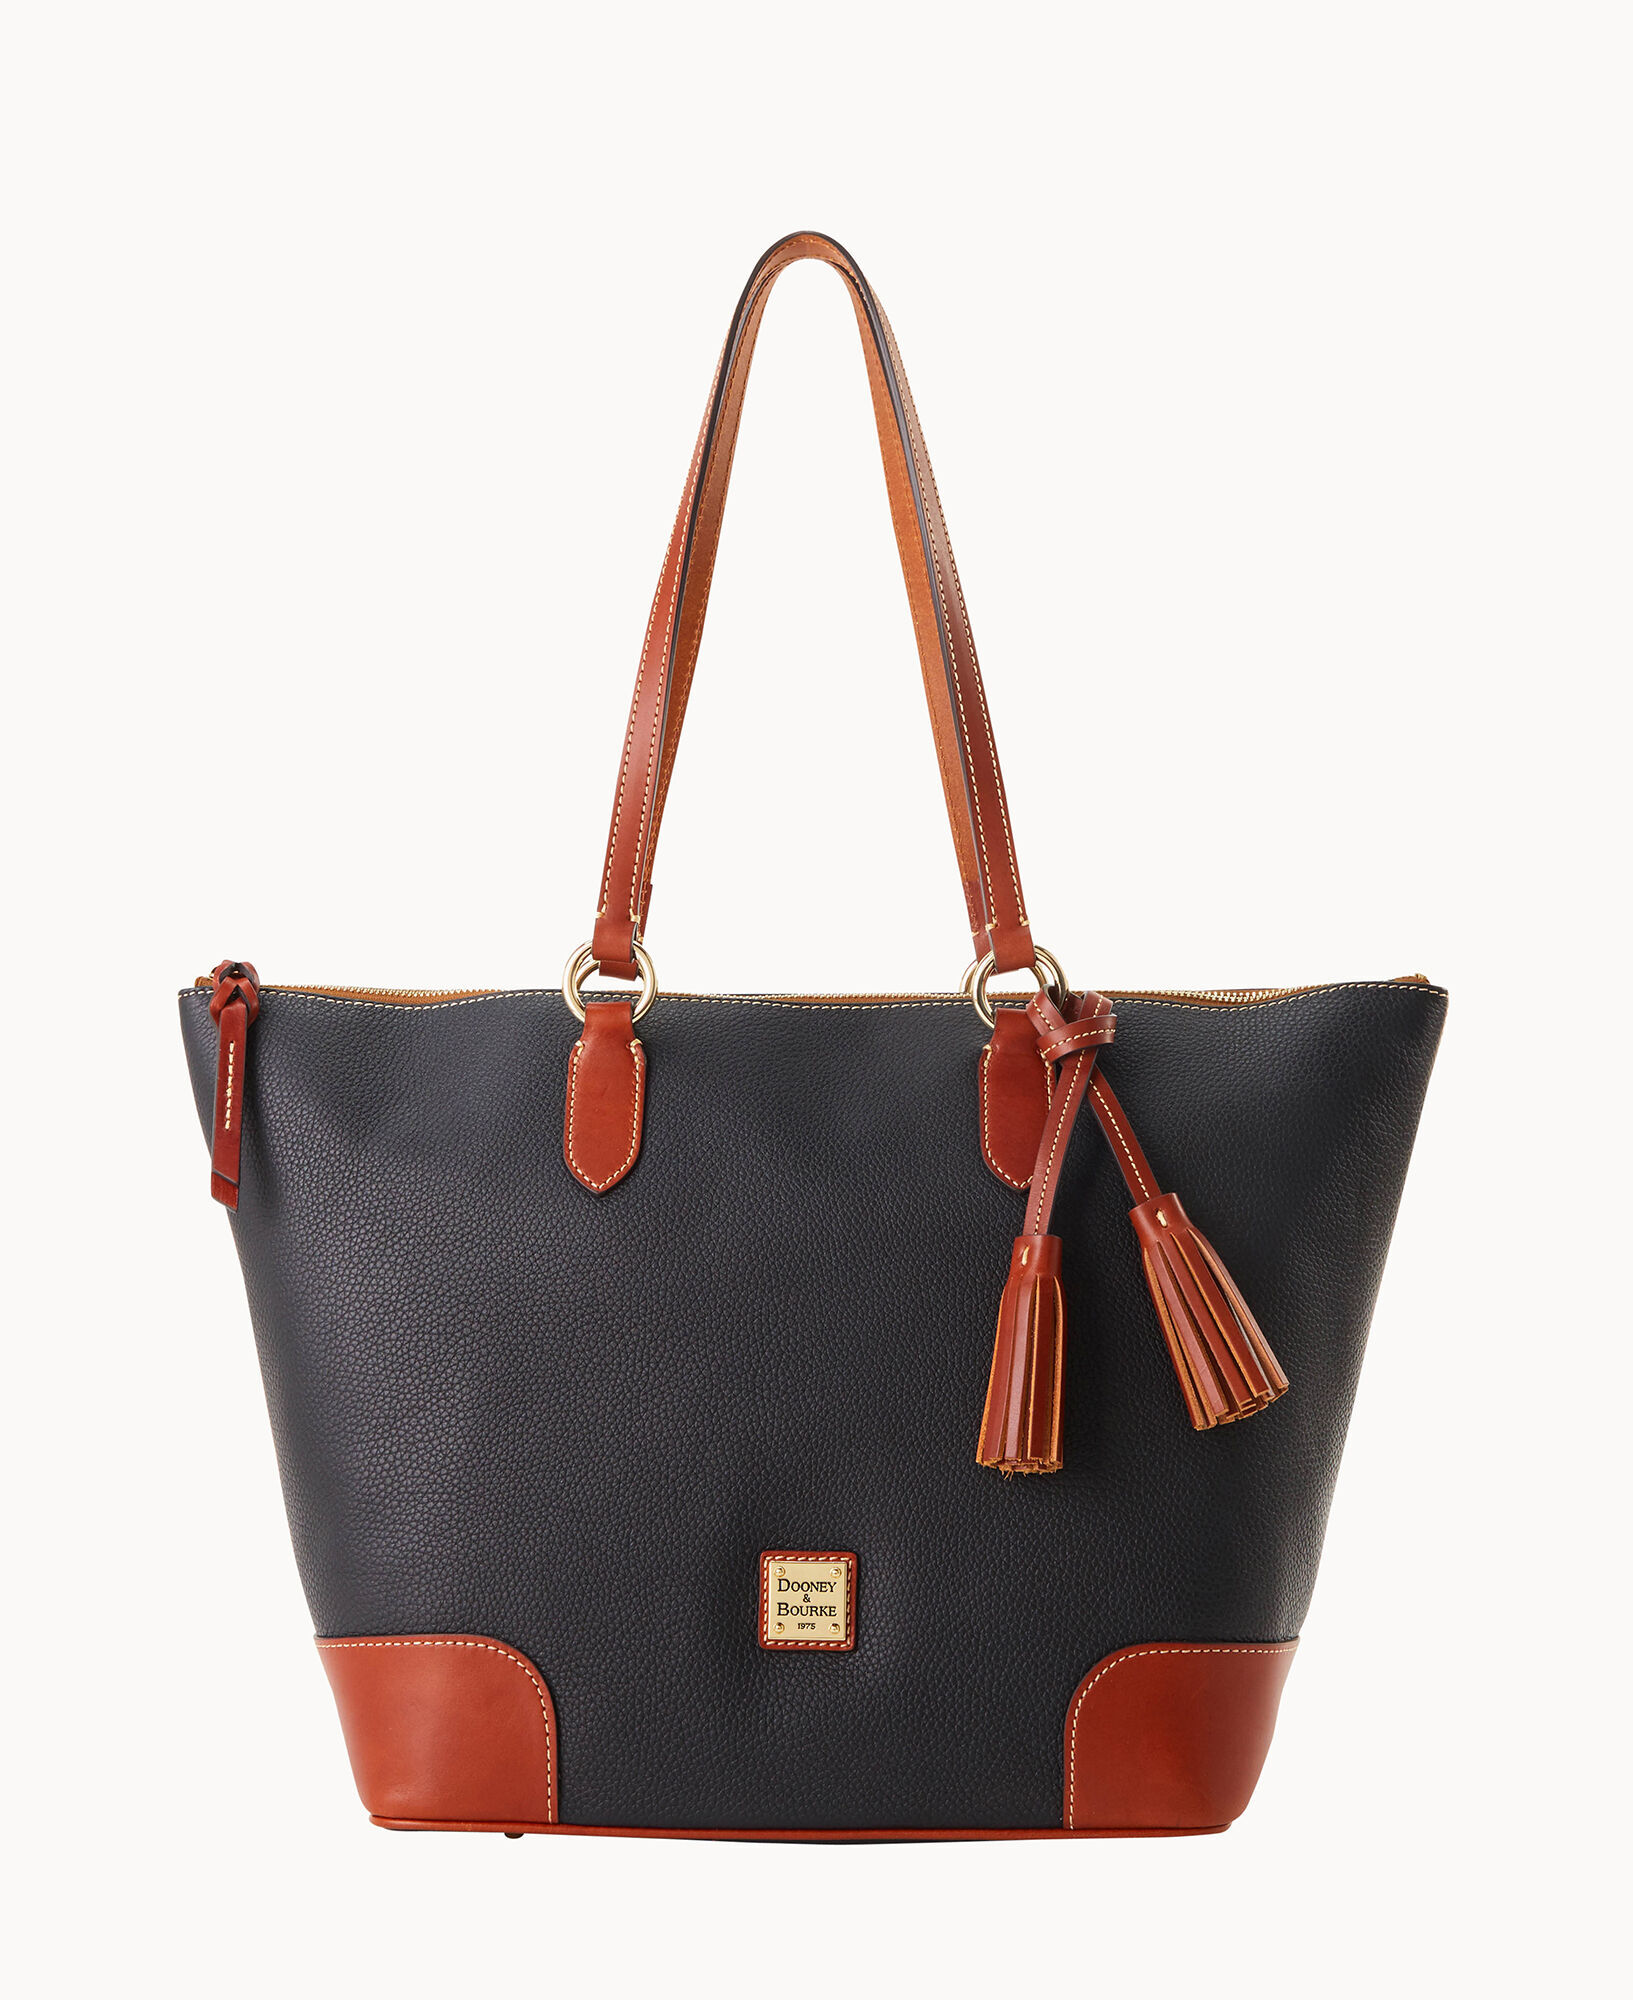 Dooney & Bourke Pebble Collection Large Tote Bag